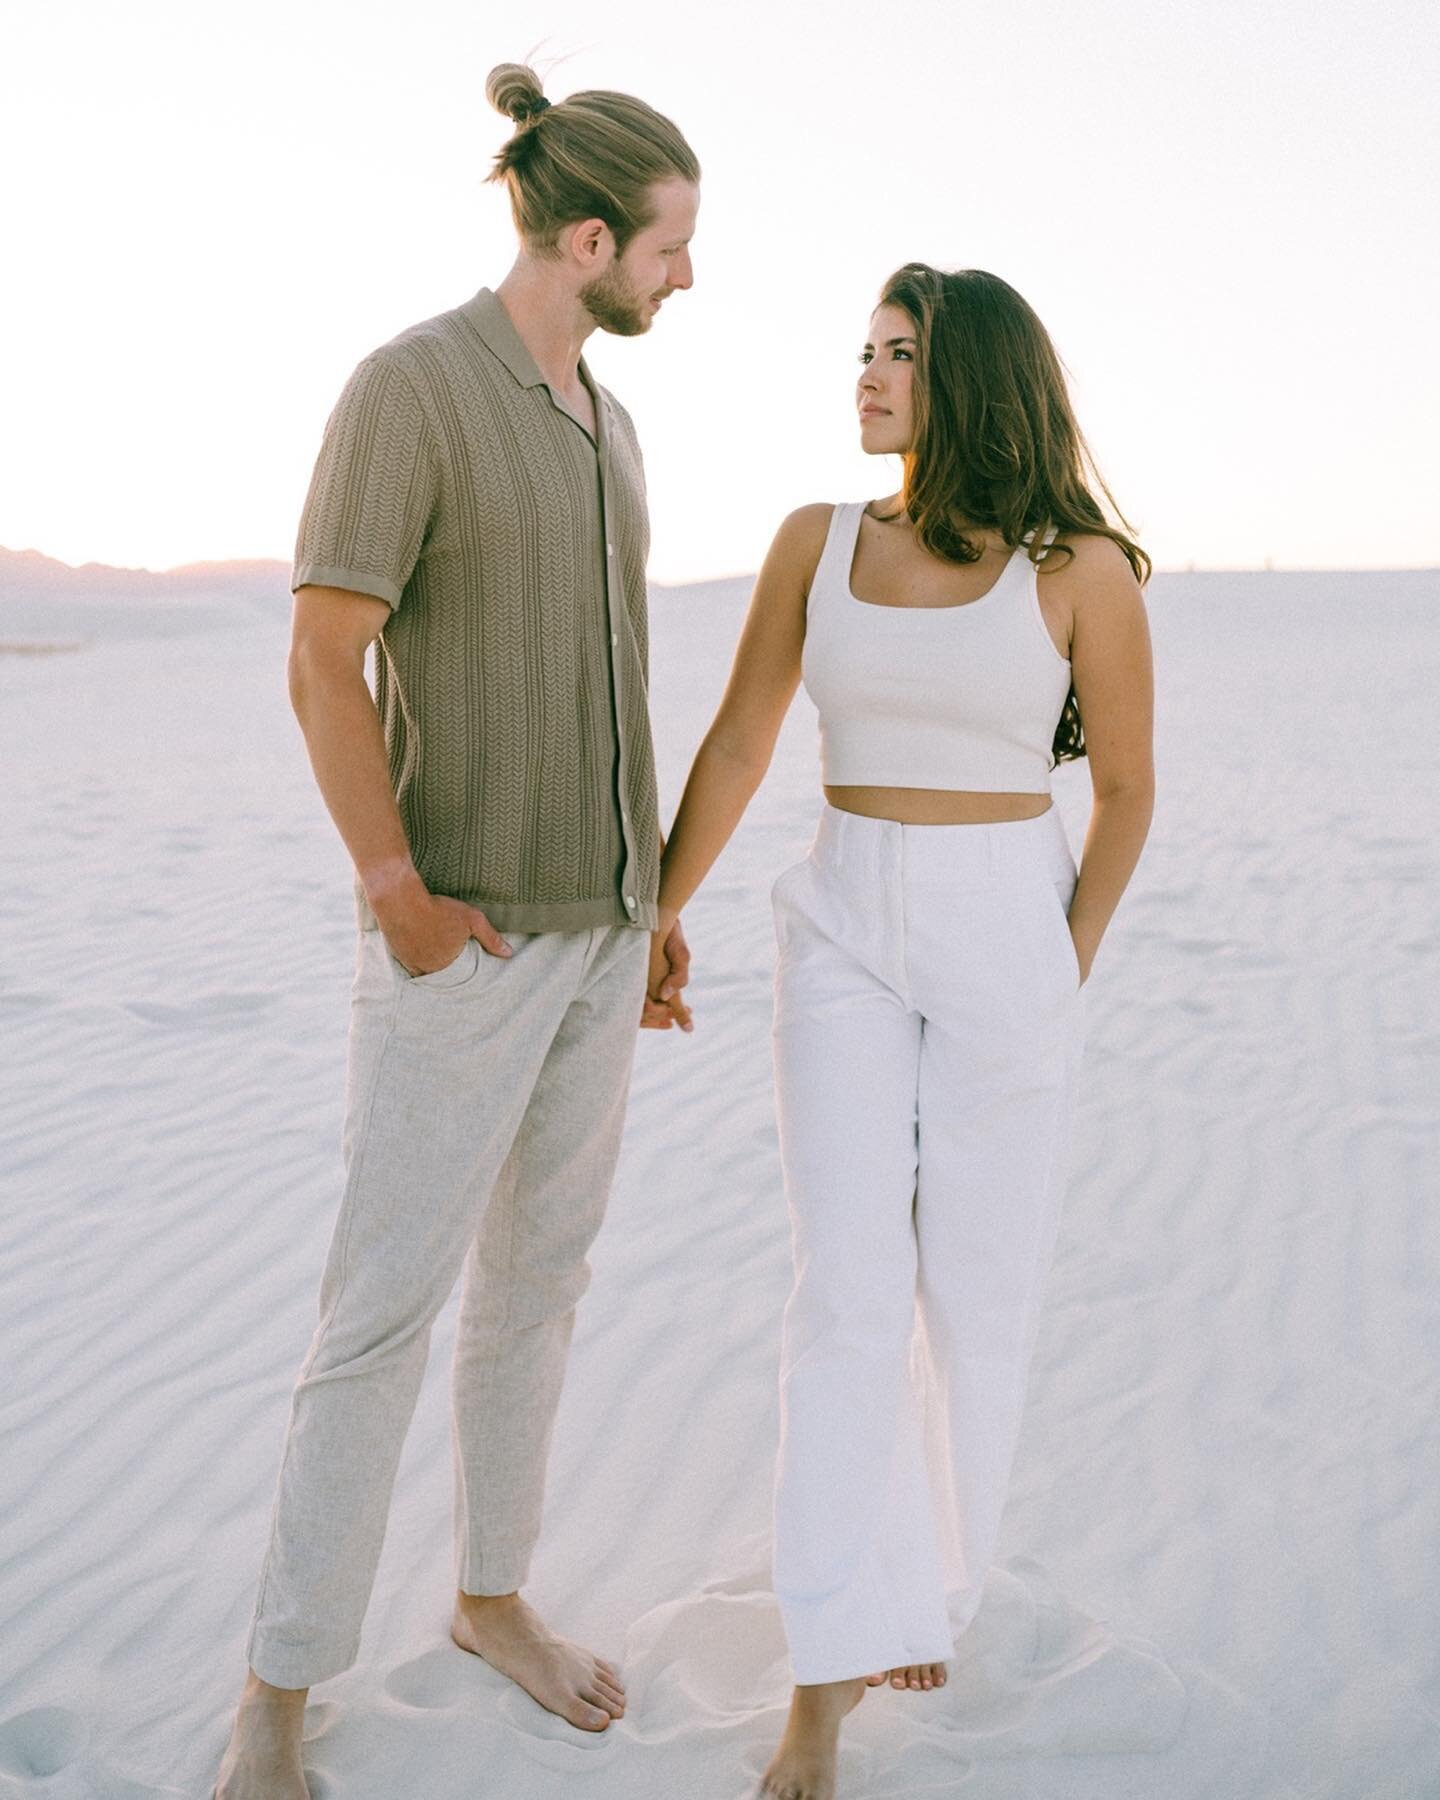 But save a little commotion for this perfect white sands shoot with R &amp; M 🕊️